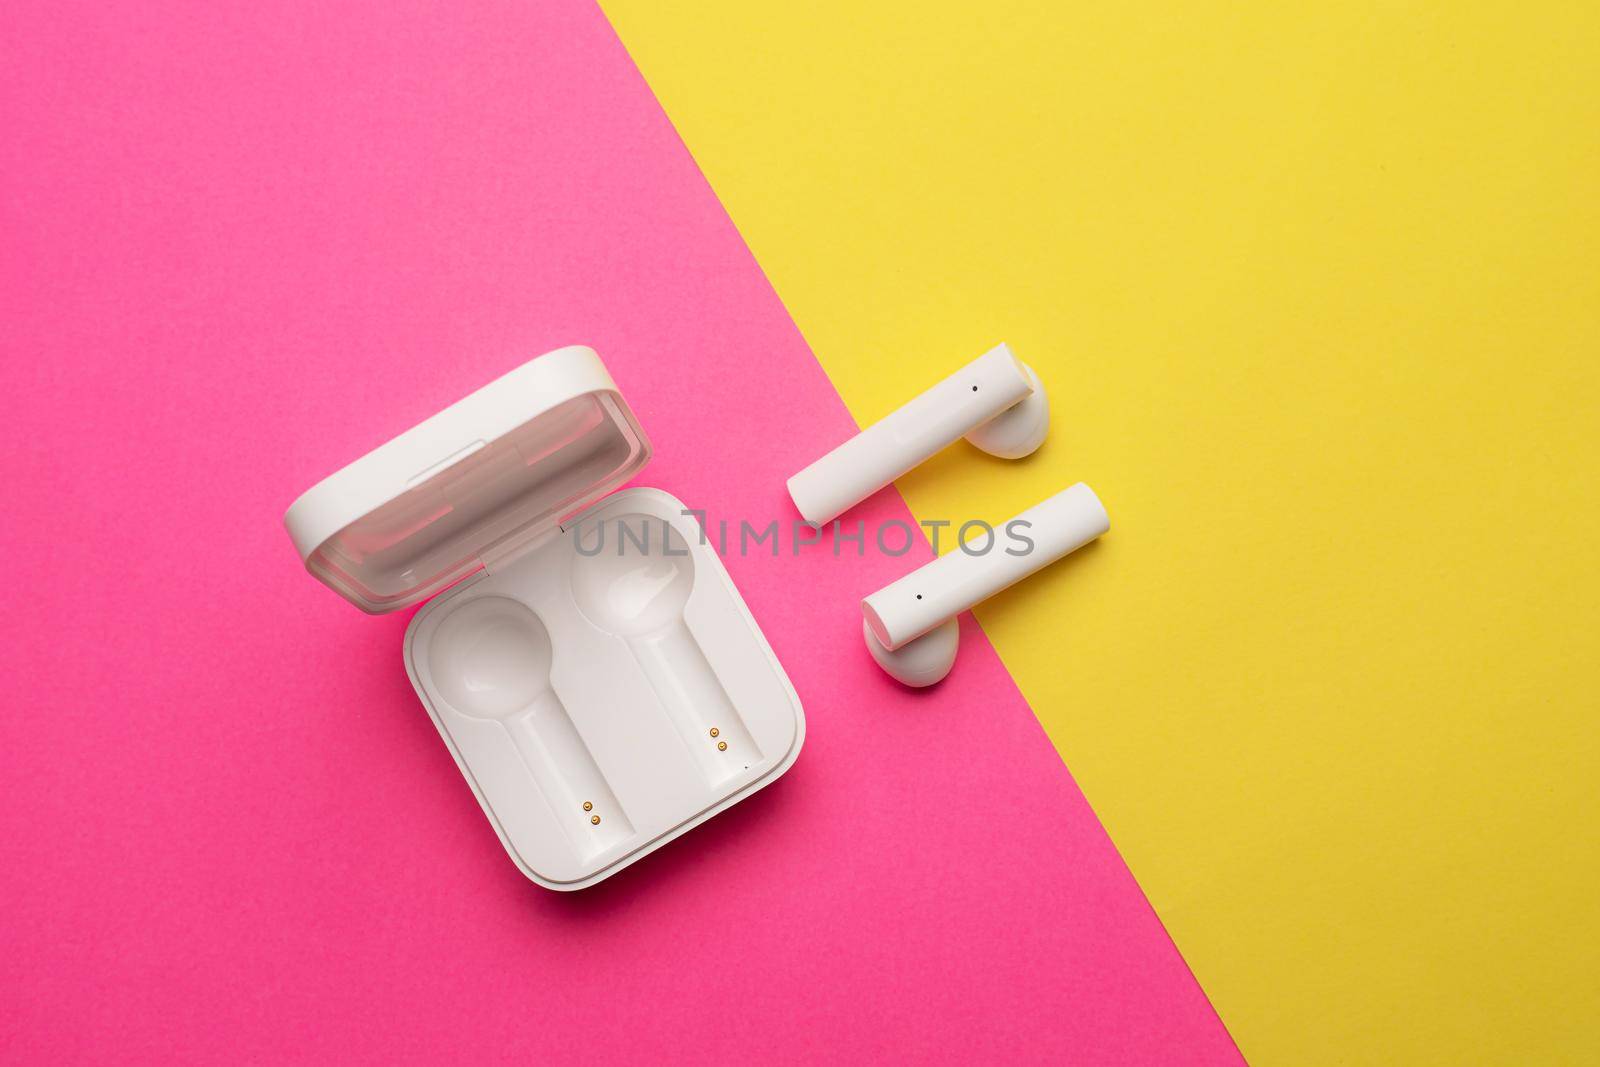 Wireless headphones on a pink background . Bright background. White headphones. Bluetooth headset. Pink and yellow background. Copy space. An article about technology. Modern technologies.